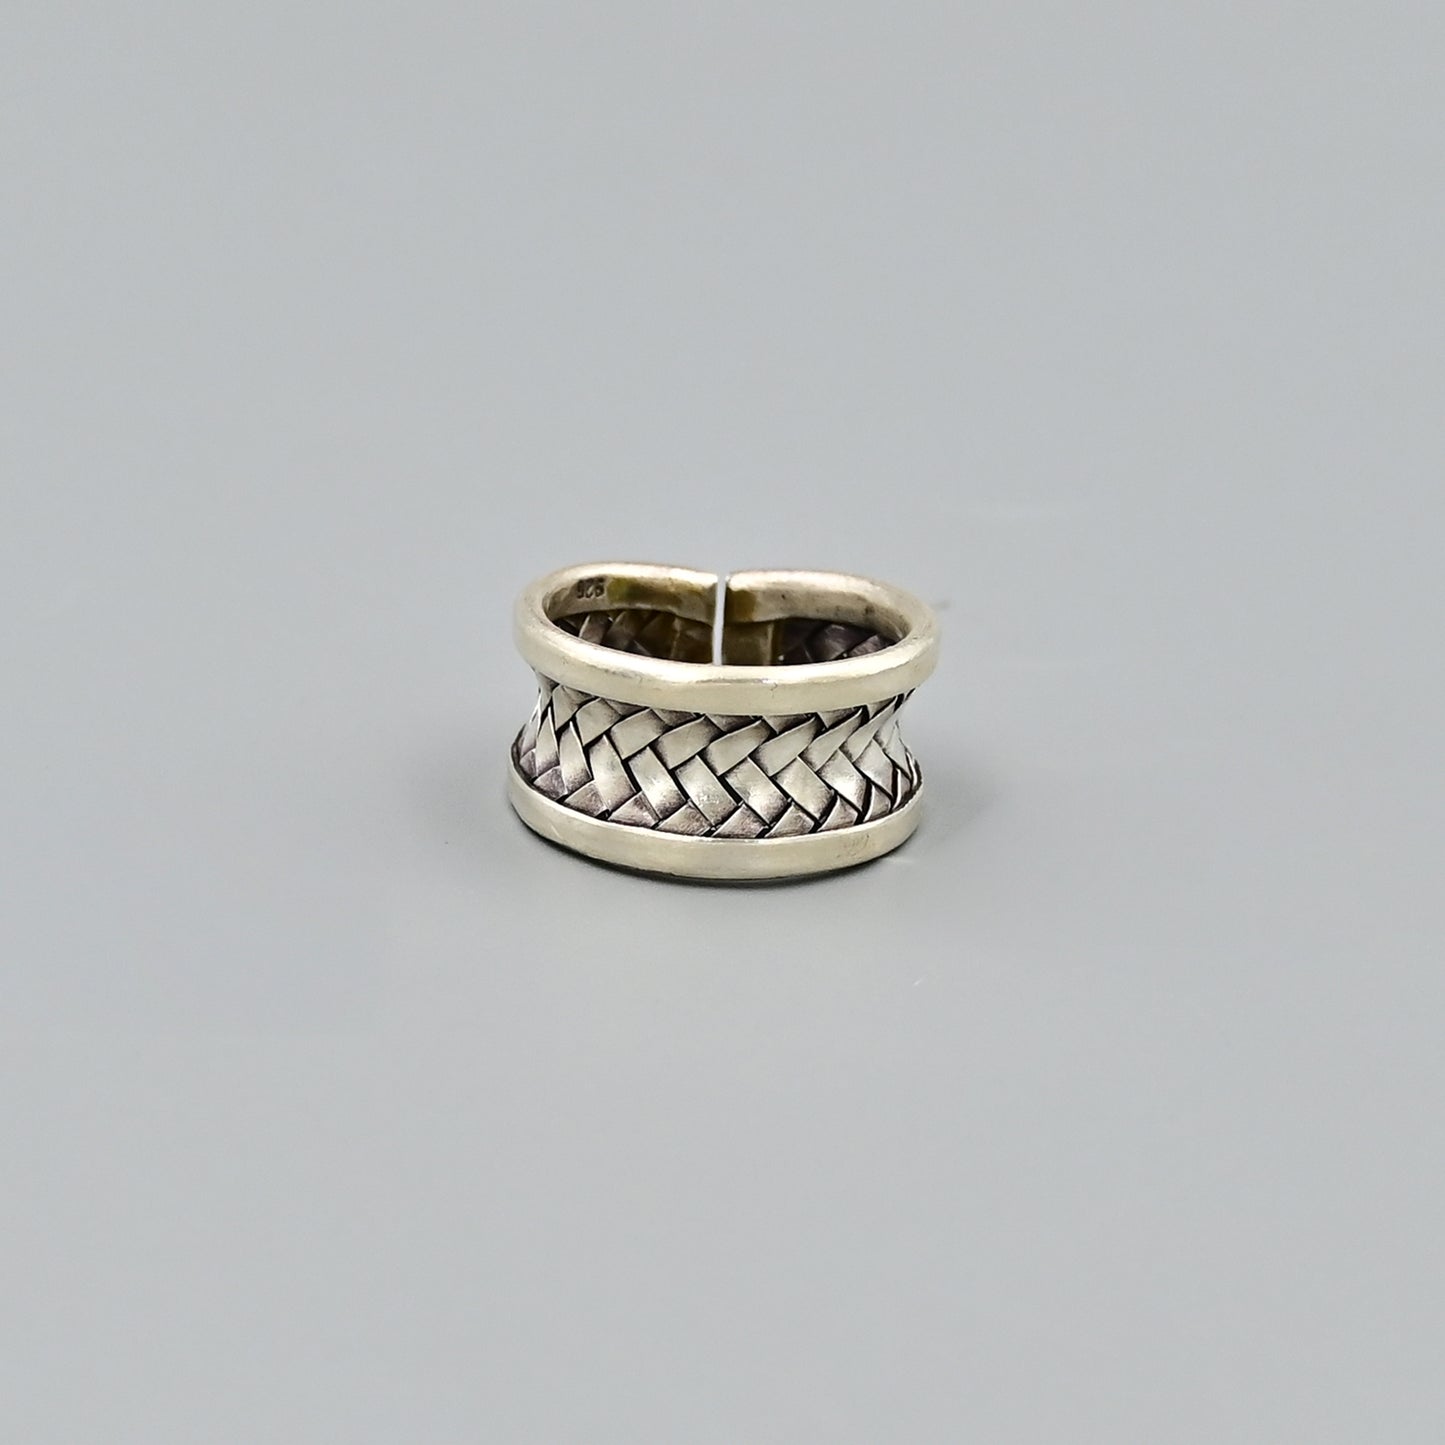 Woven Tribal Ring! 🌟✨